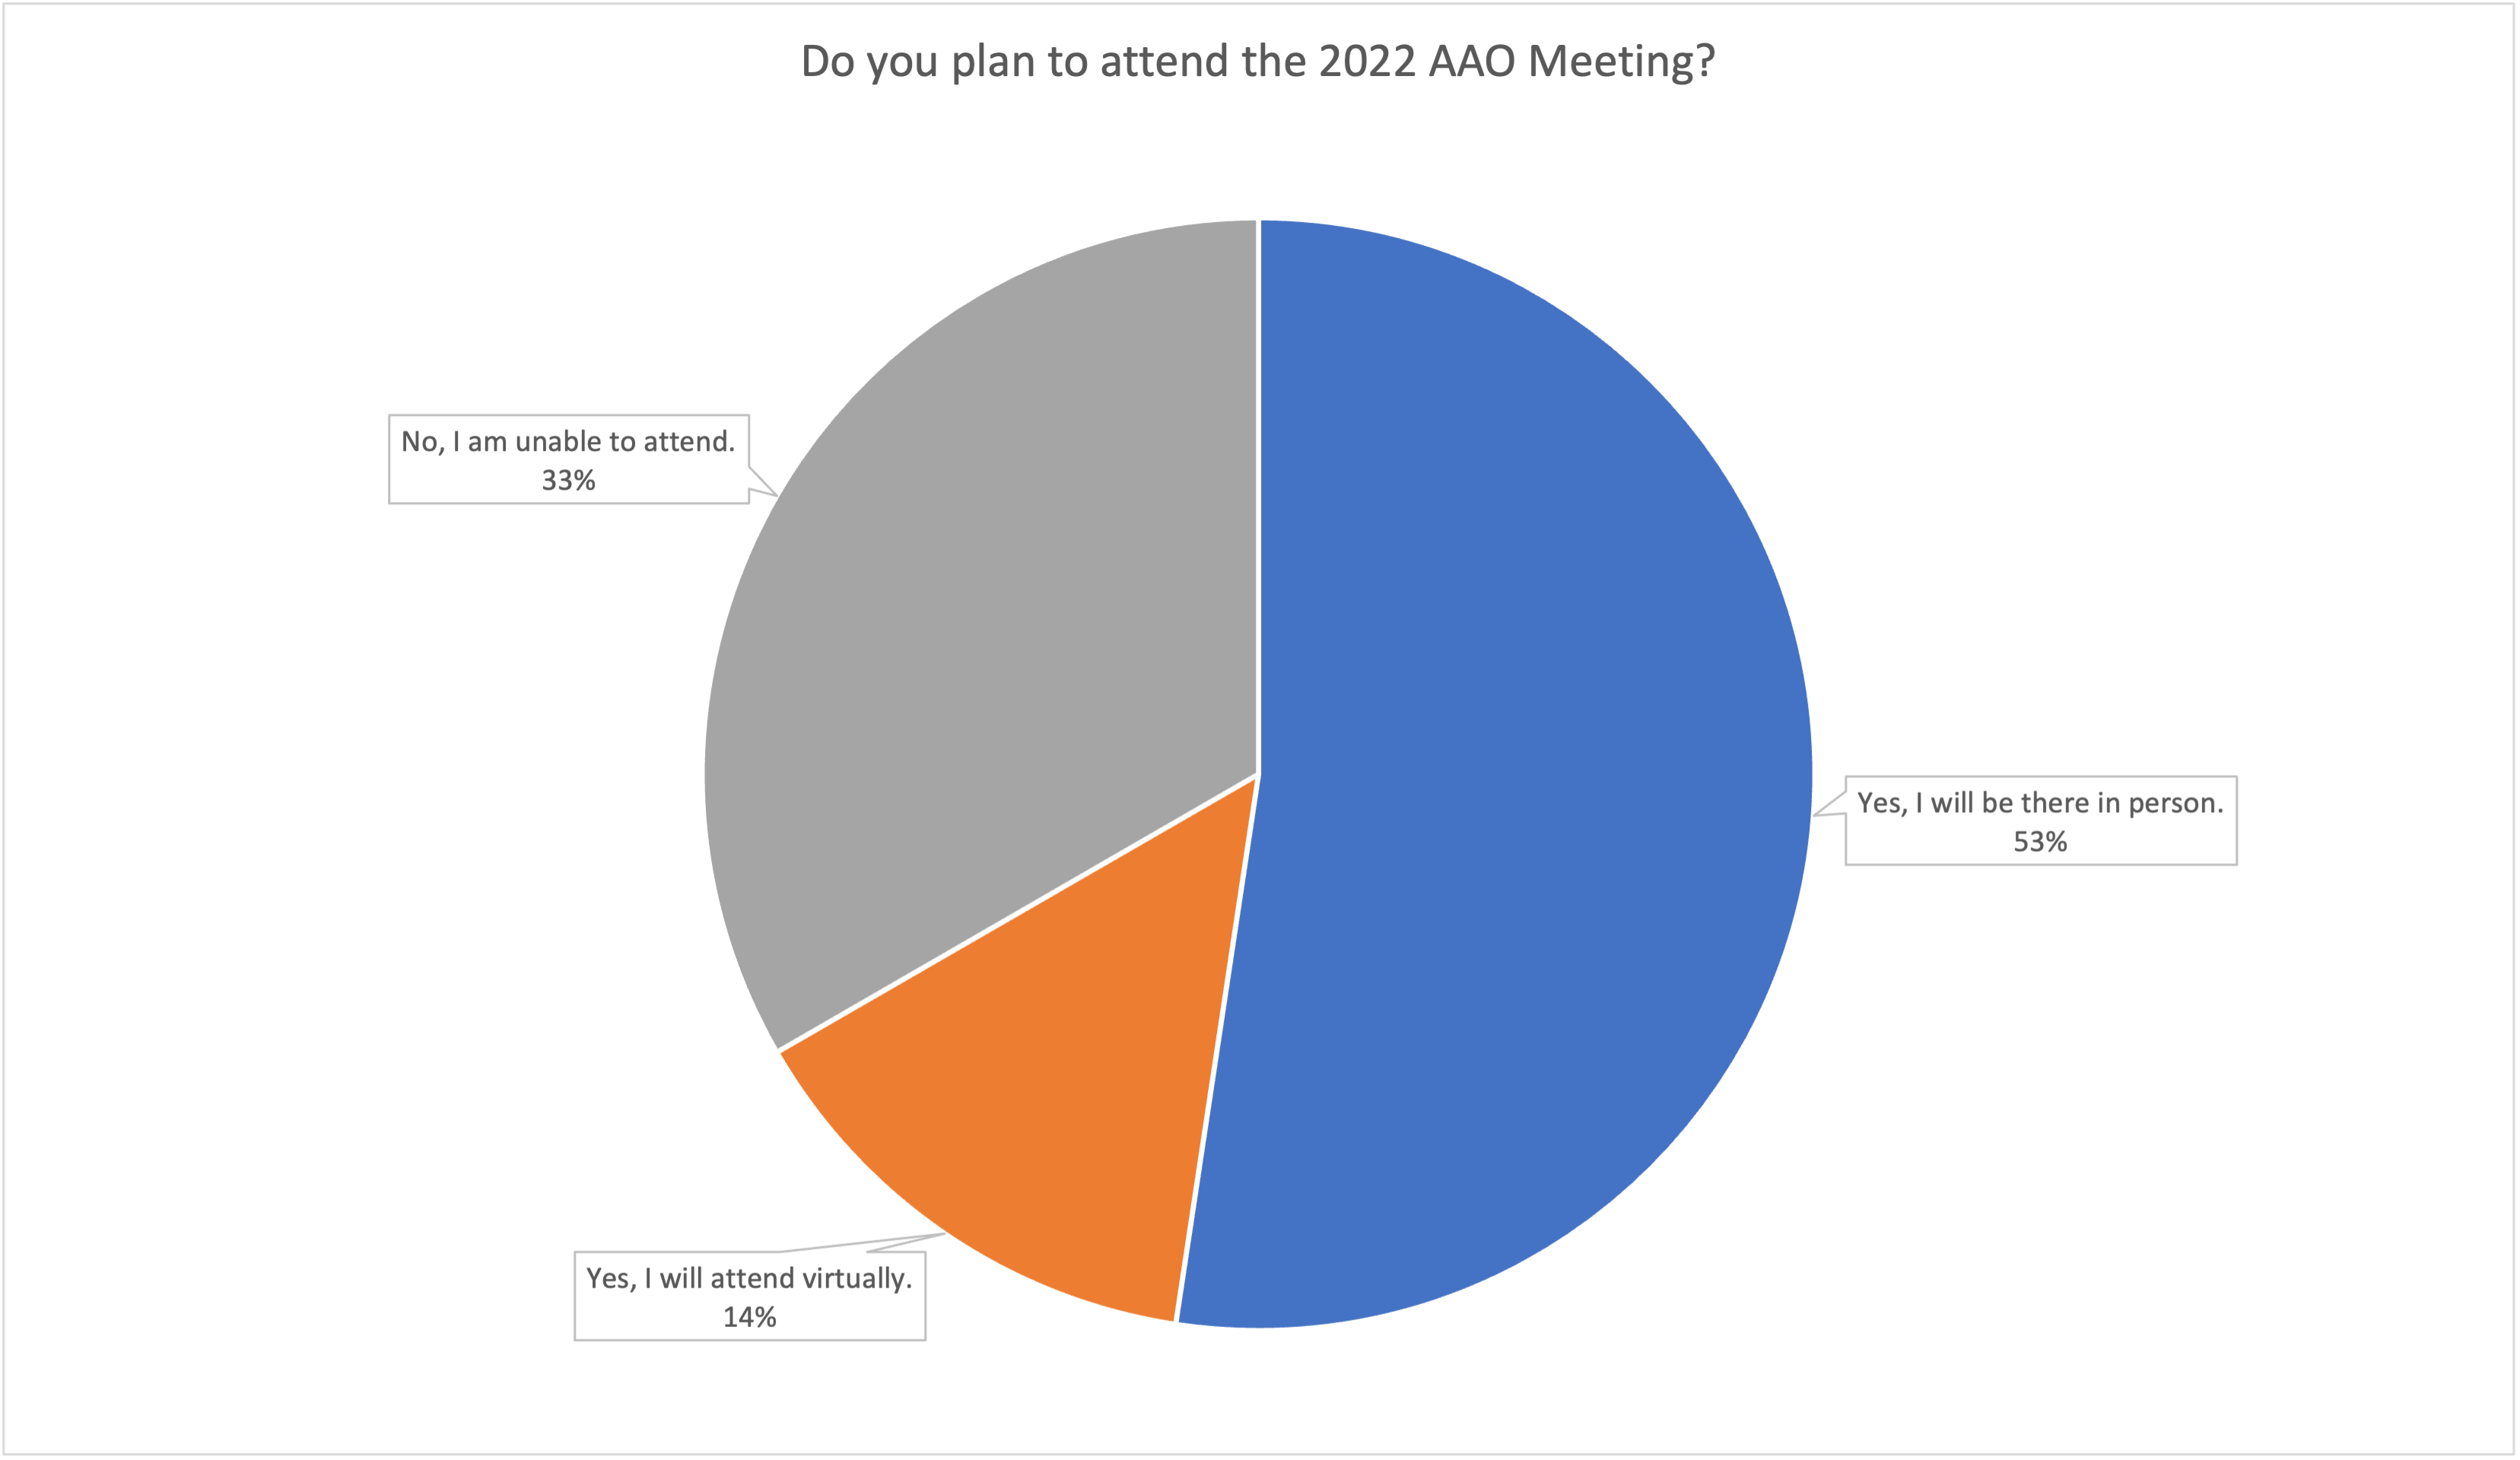 Poll results: Do you plan to attend the 2022 AAO Meeting?